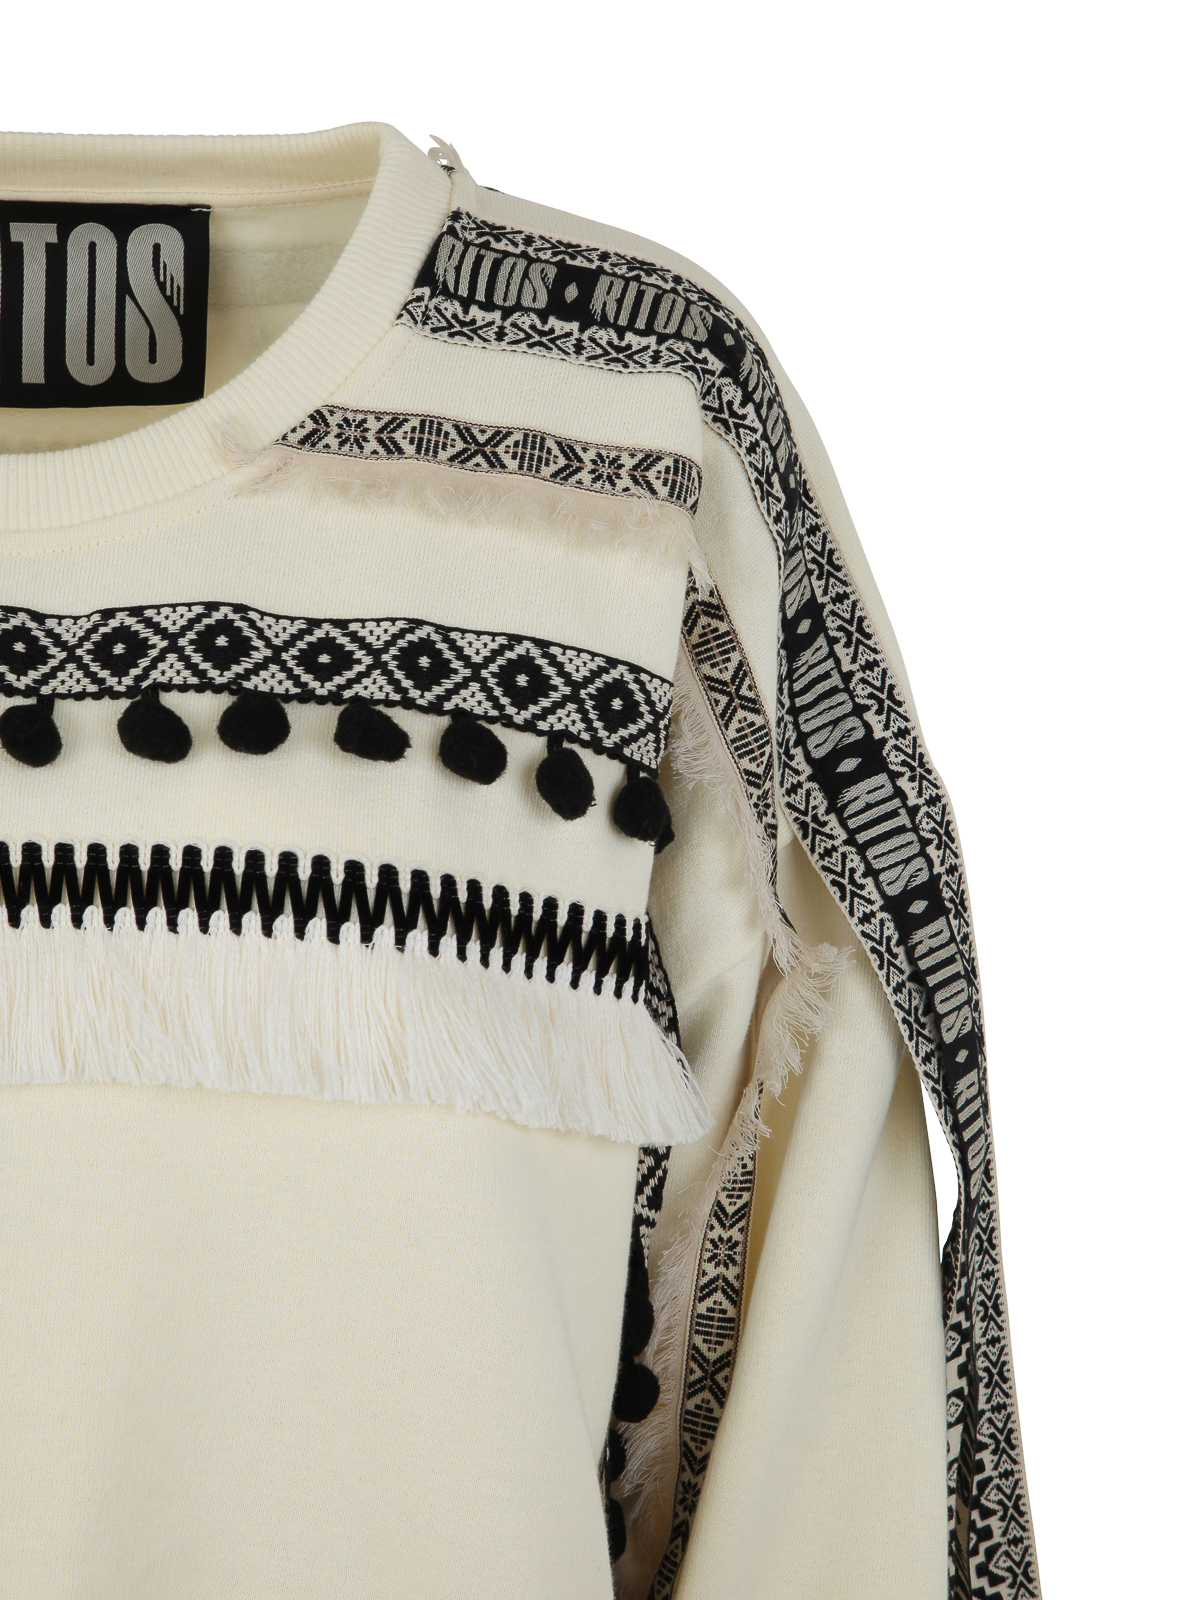 Shop Ritos Cropped Sweater With Tentacles In White